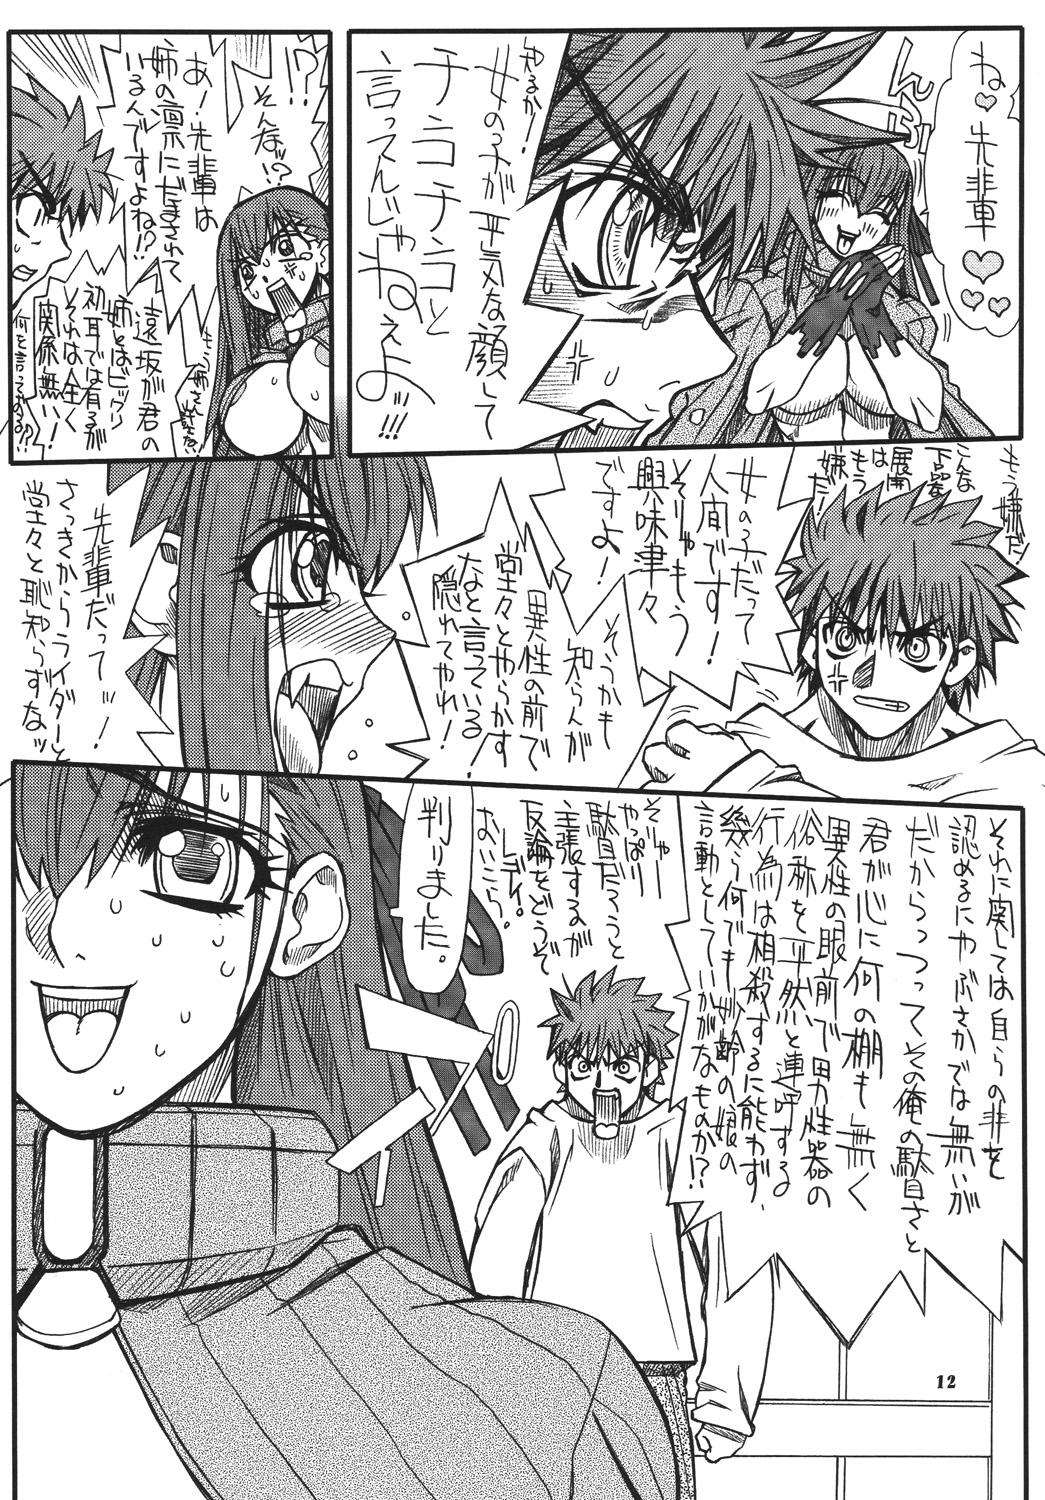 Mmf Akihime Yon - Fate stay night She - Page 11